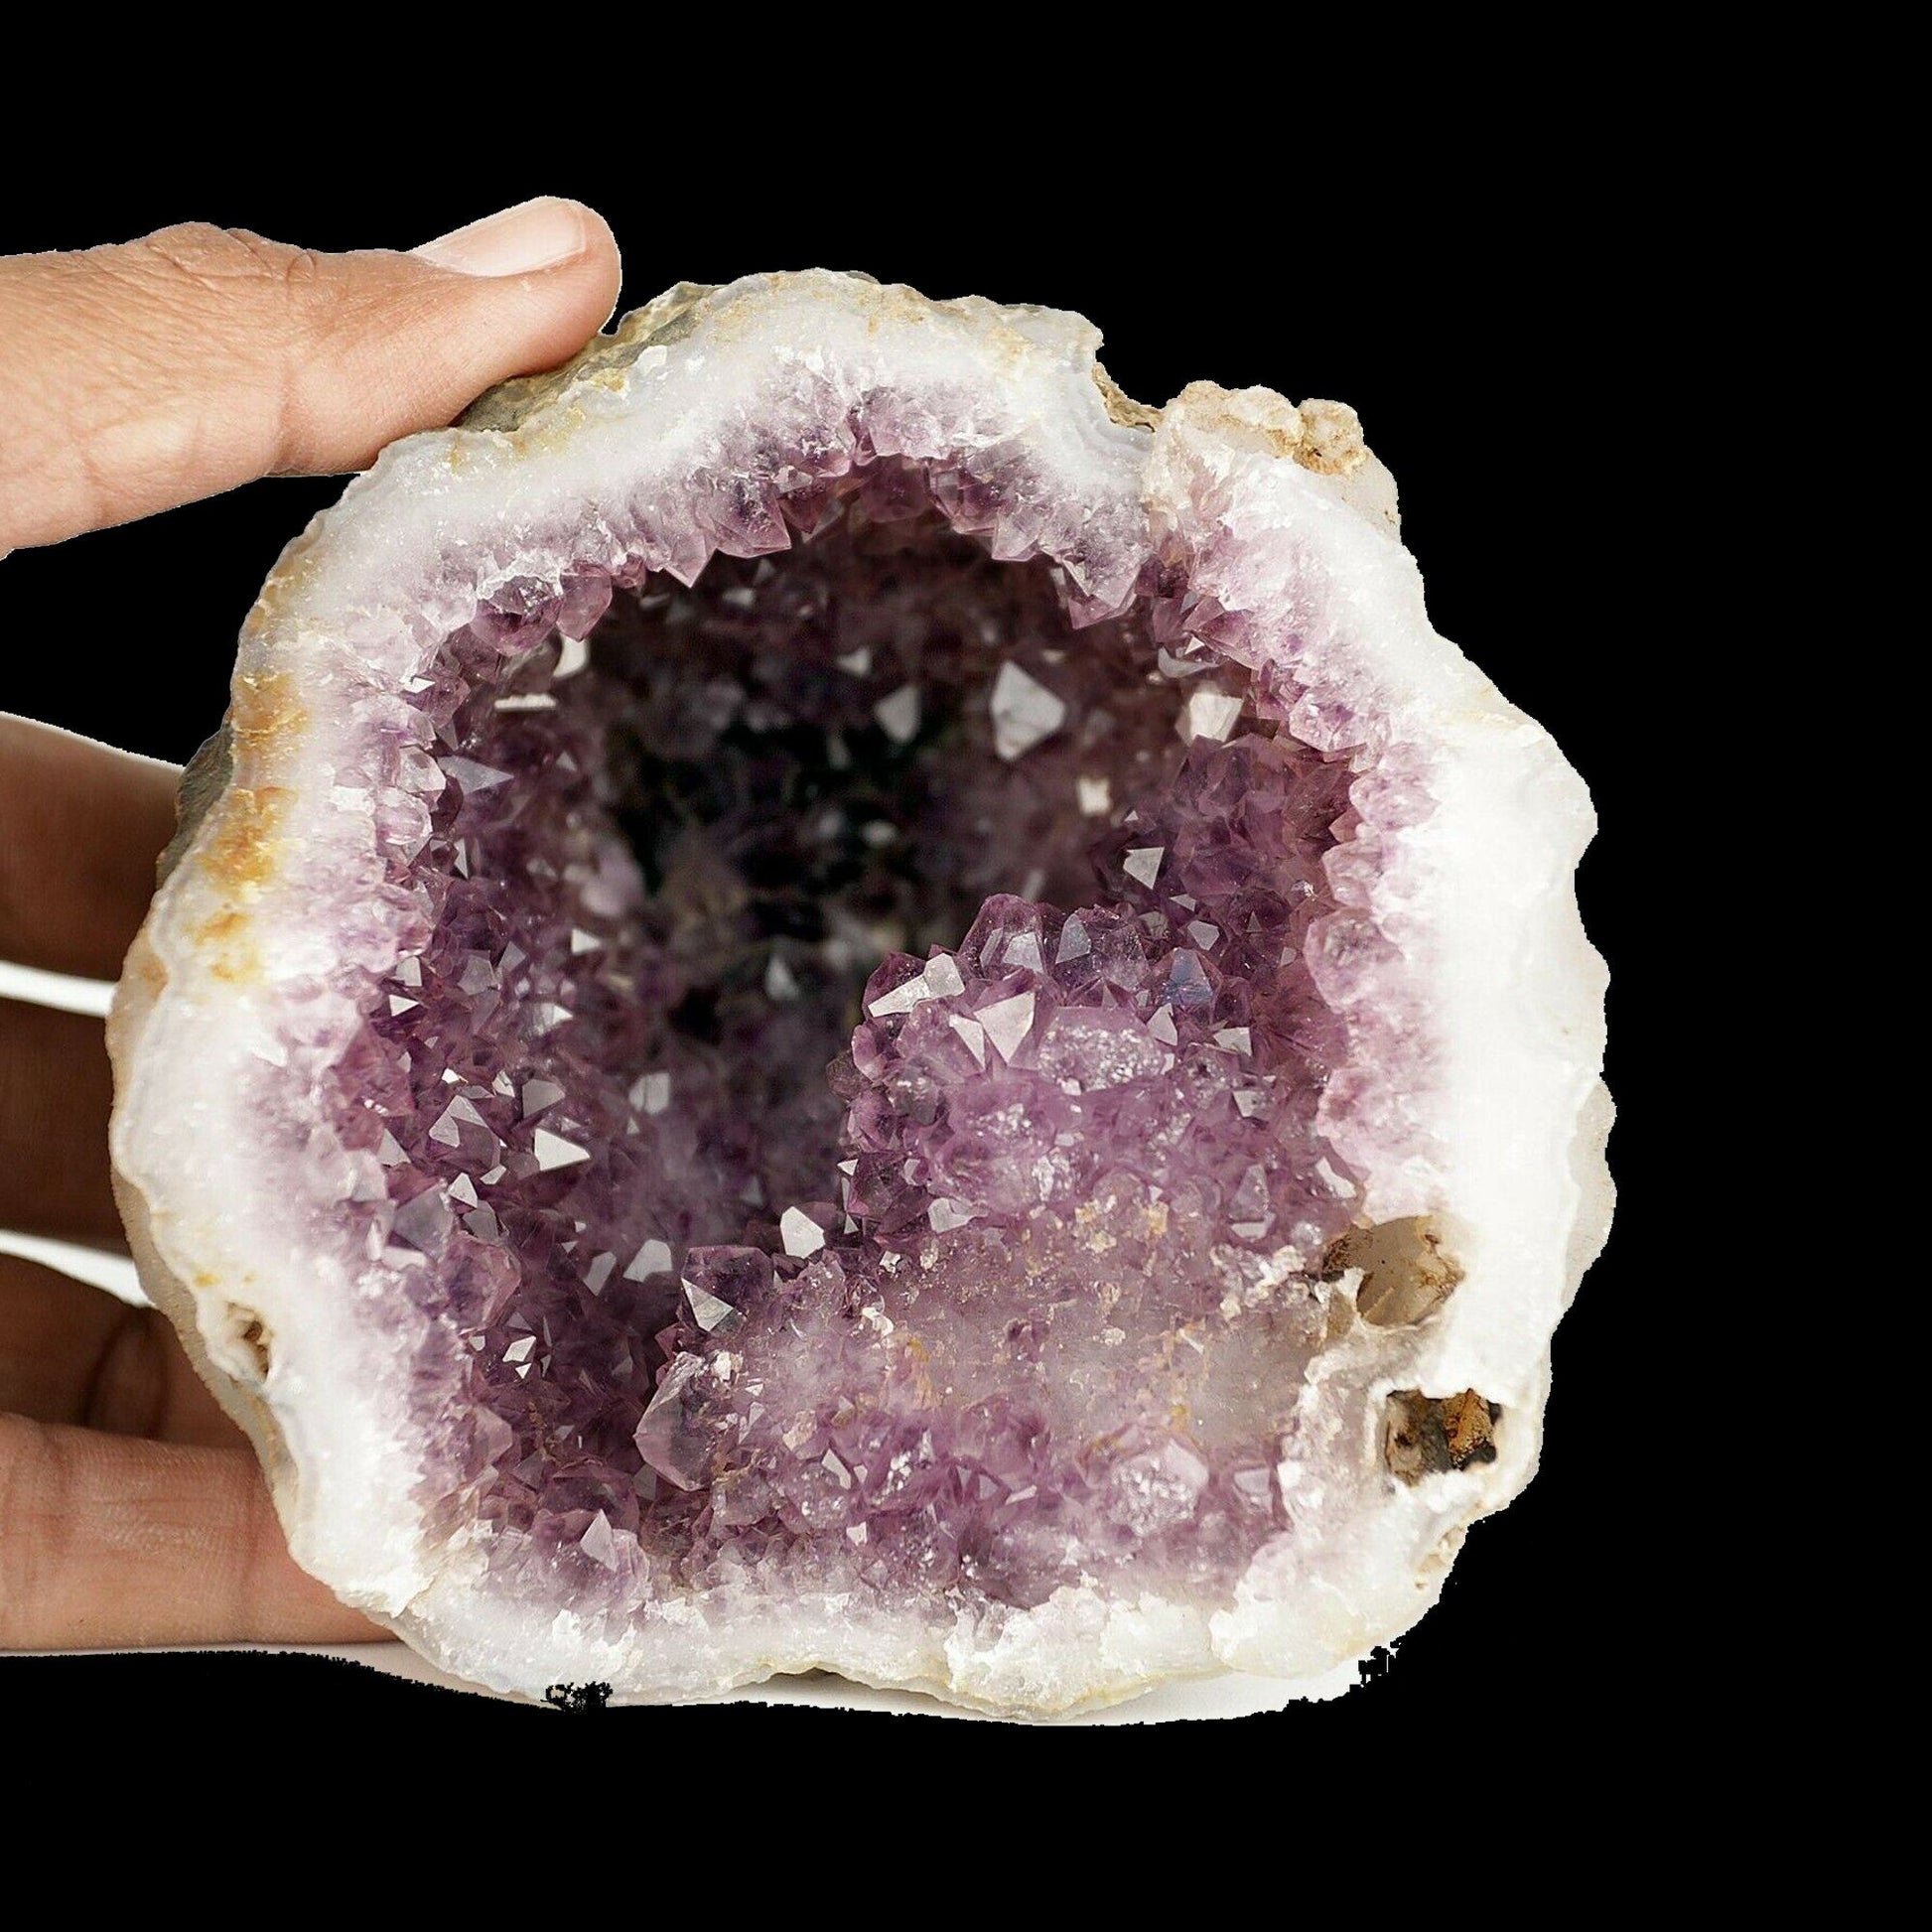 Amethyst purple cluster Natural Mineral Specimen # B 3666  https://www.superbminerals.us/products/amethyst-purple-cluster-natural-mineral-specimen-b-3666  Features A Geode lined with lustrous, translucent, deep purple Amethyst Quartz crystals. The intense purple found in India Amethyst is unlike anything else available, and this piece is no exception. Very aesthetic with amazing color and luster, and a great value. In excellent condition. Primary Mineral(s): AmethystS